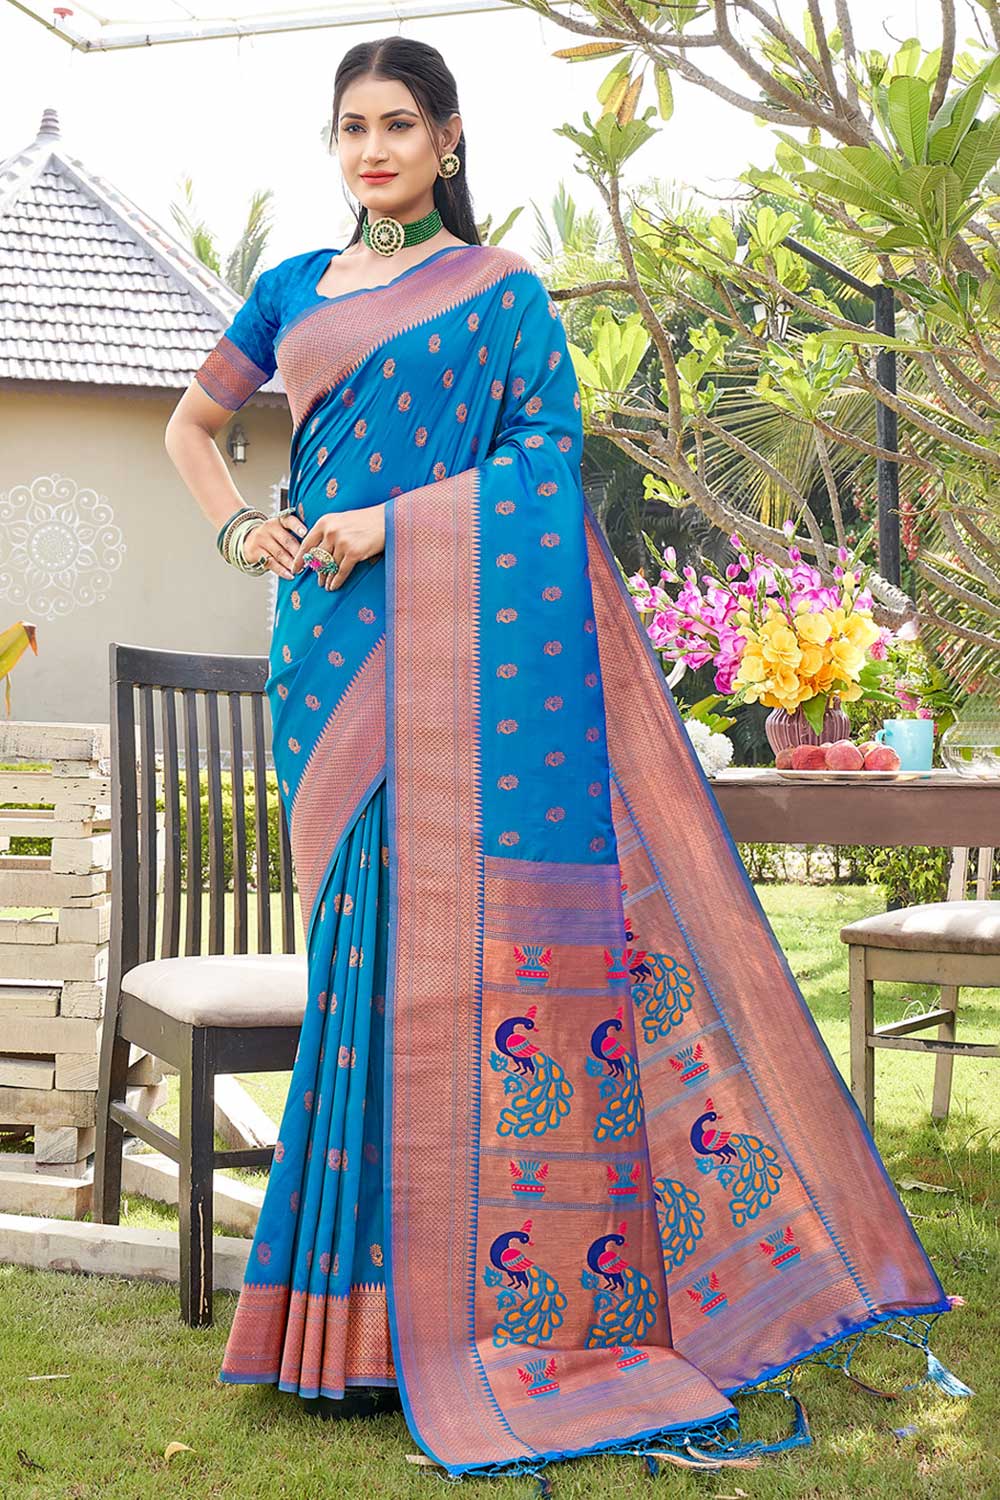 Shop Aneena Blue Paithani Art Silk One Minute Saree at best offer at our  Store - One Minute Saree